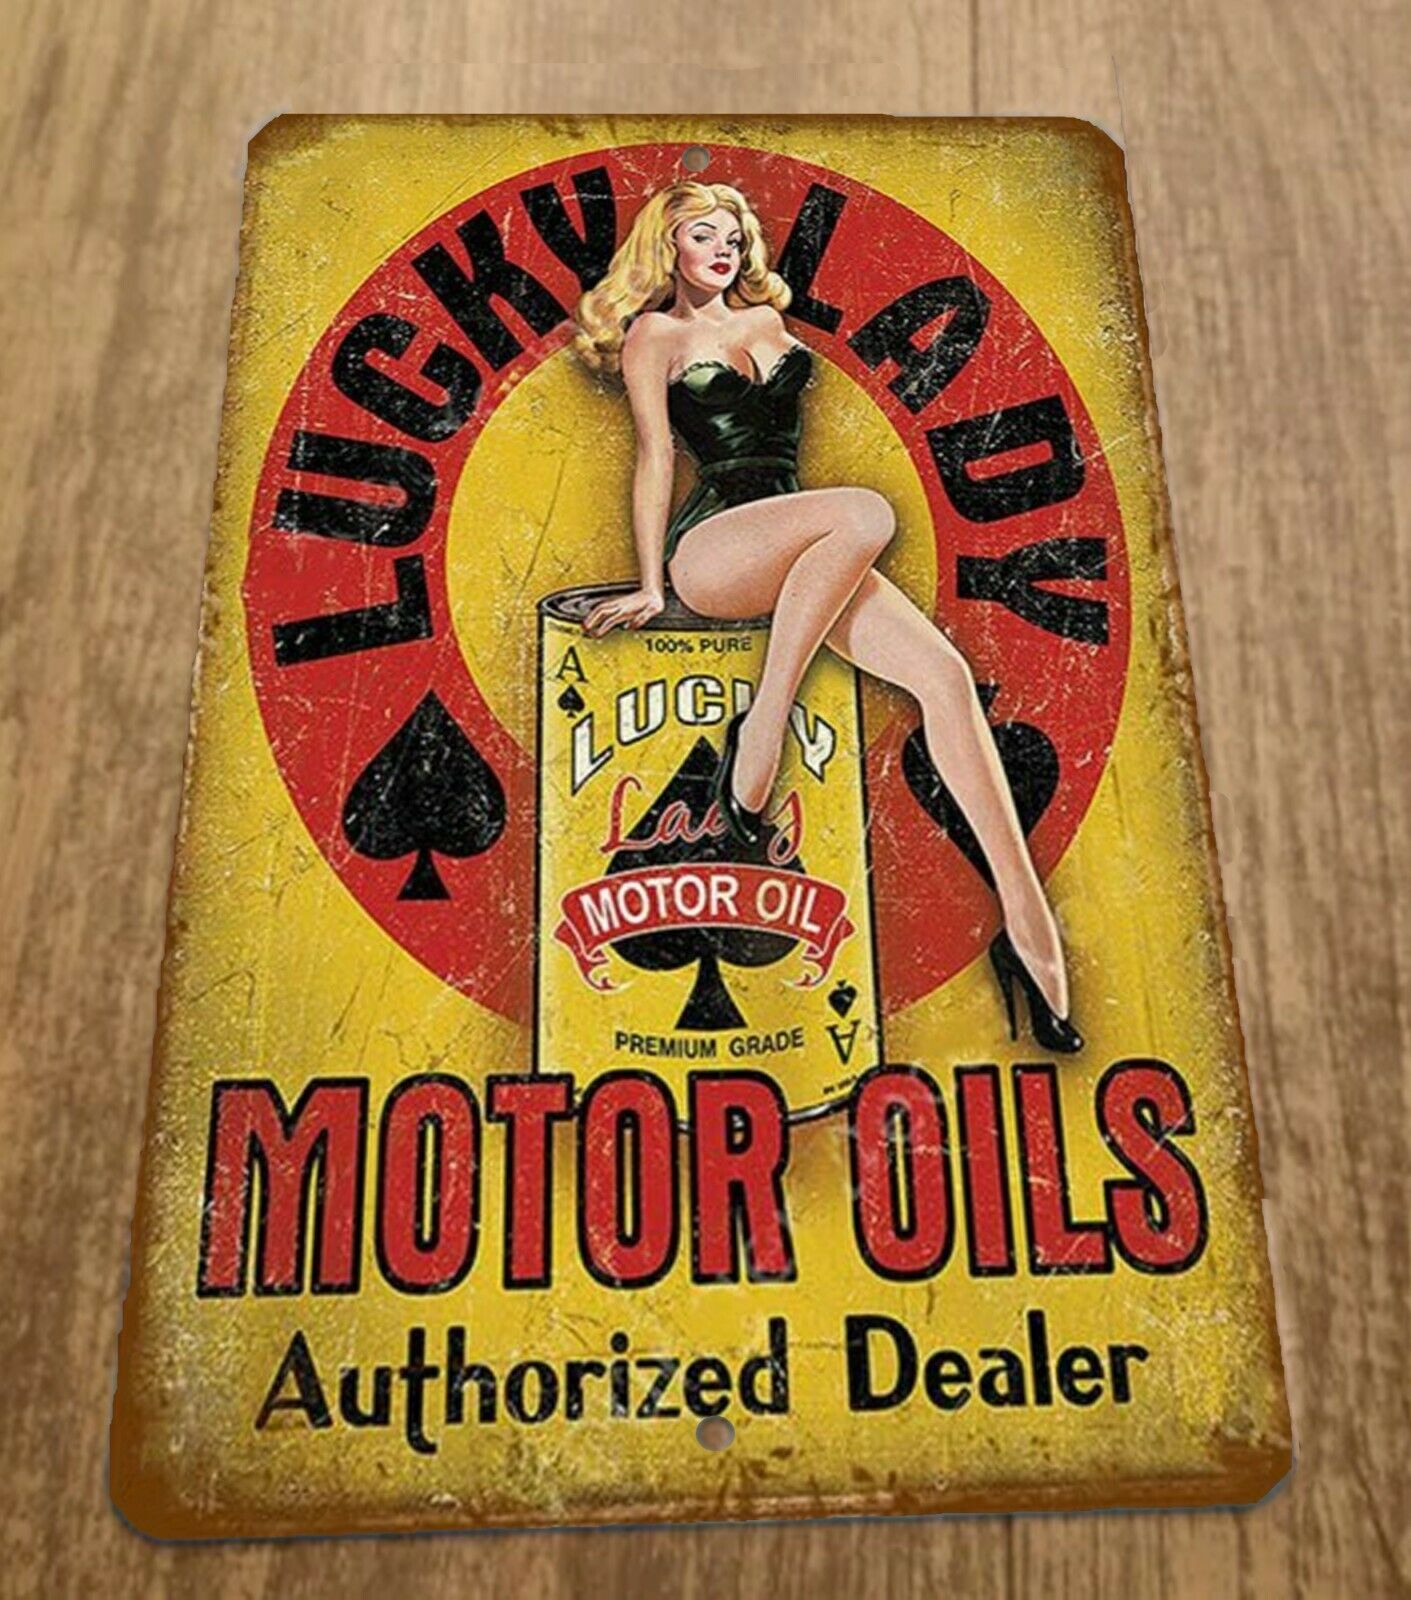 Vintage Look Lucky Lady Motor Oils Authorized Dealer 8x12 Metal Wall Sign